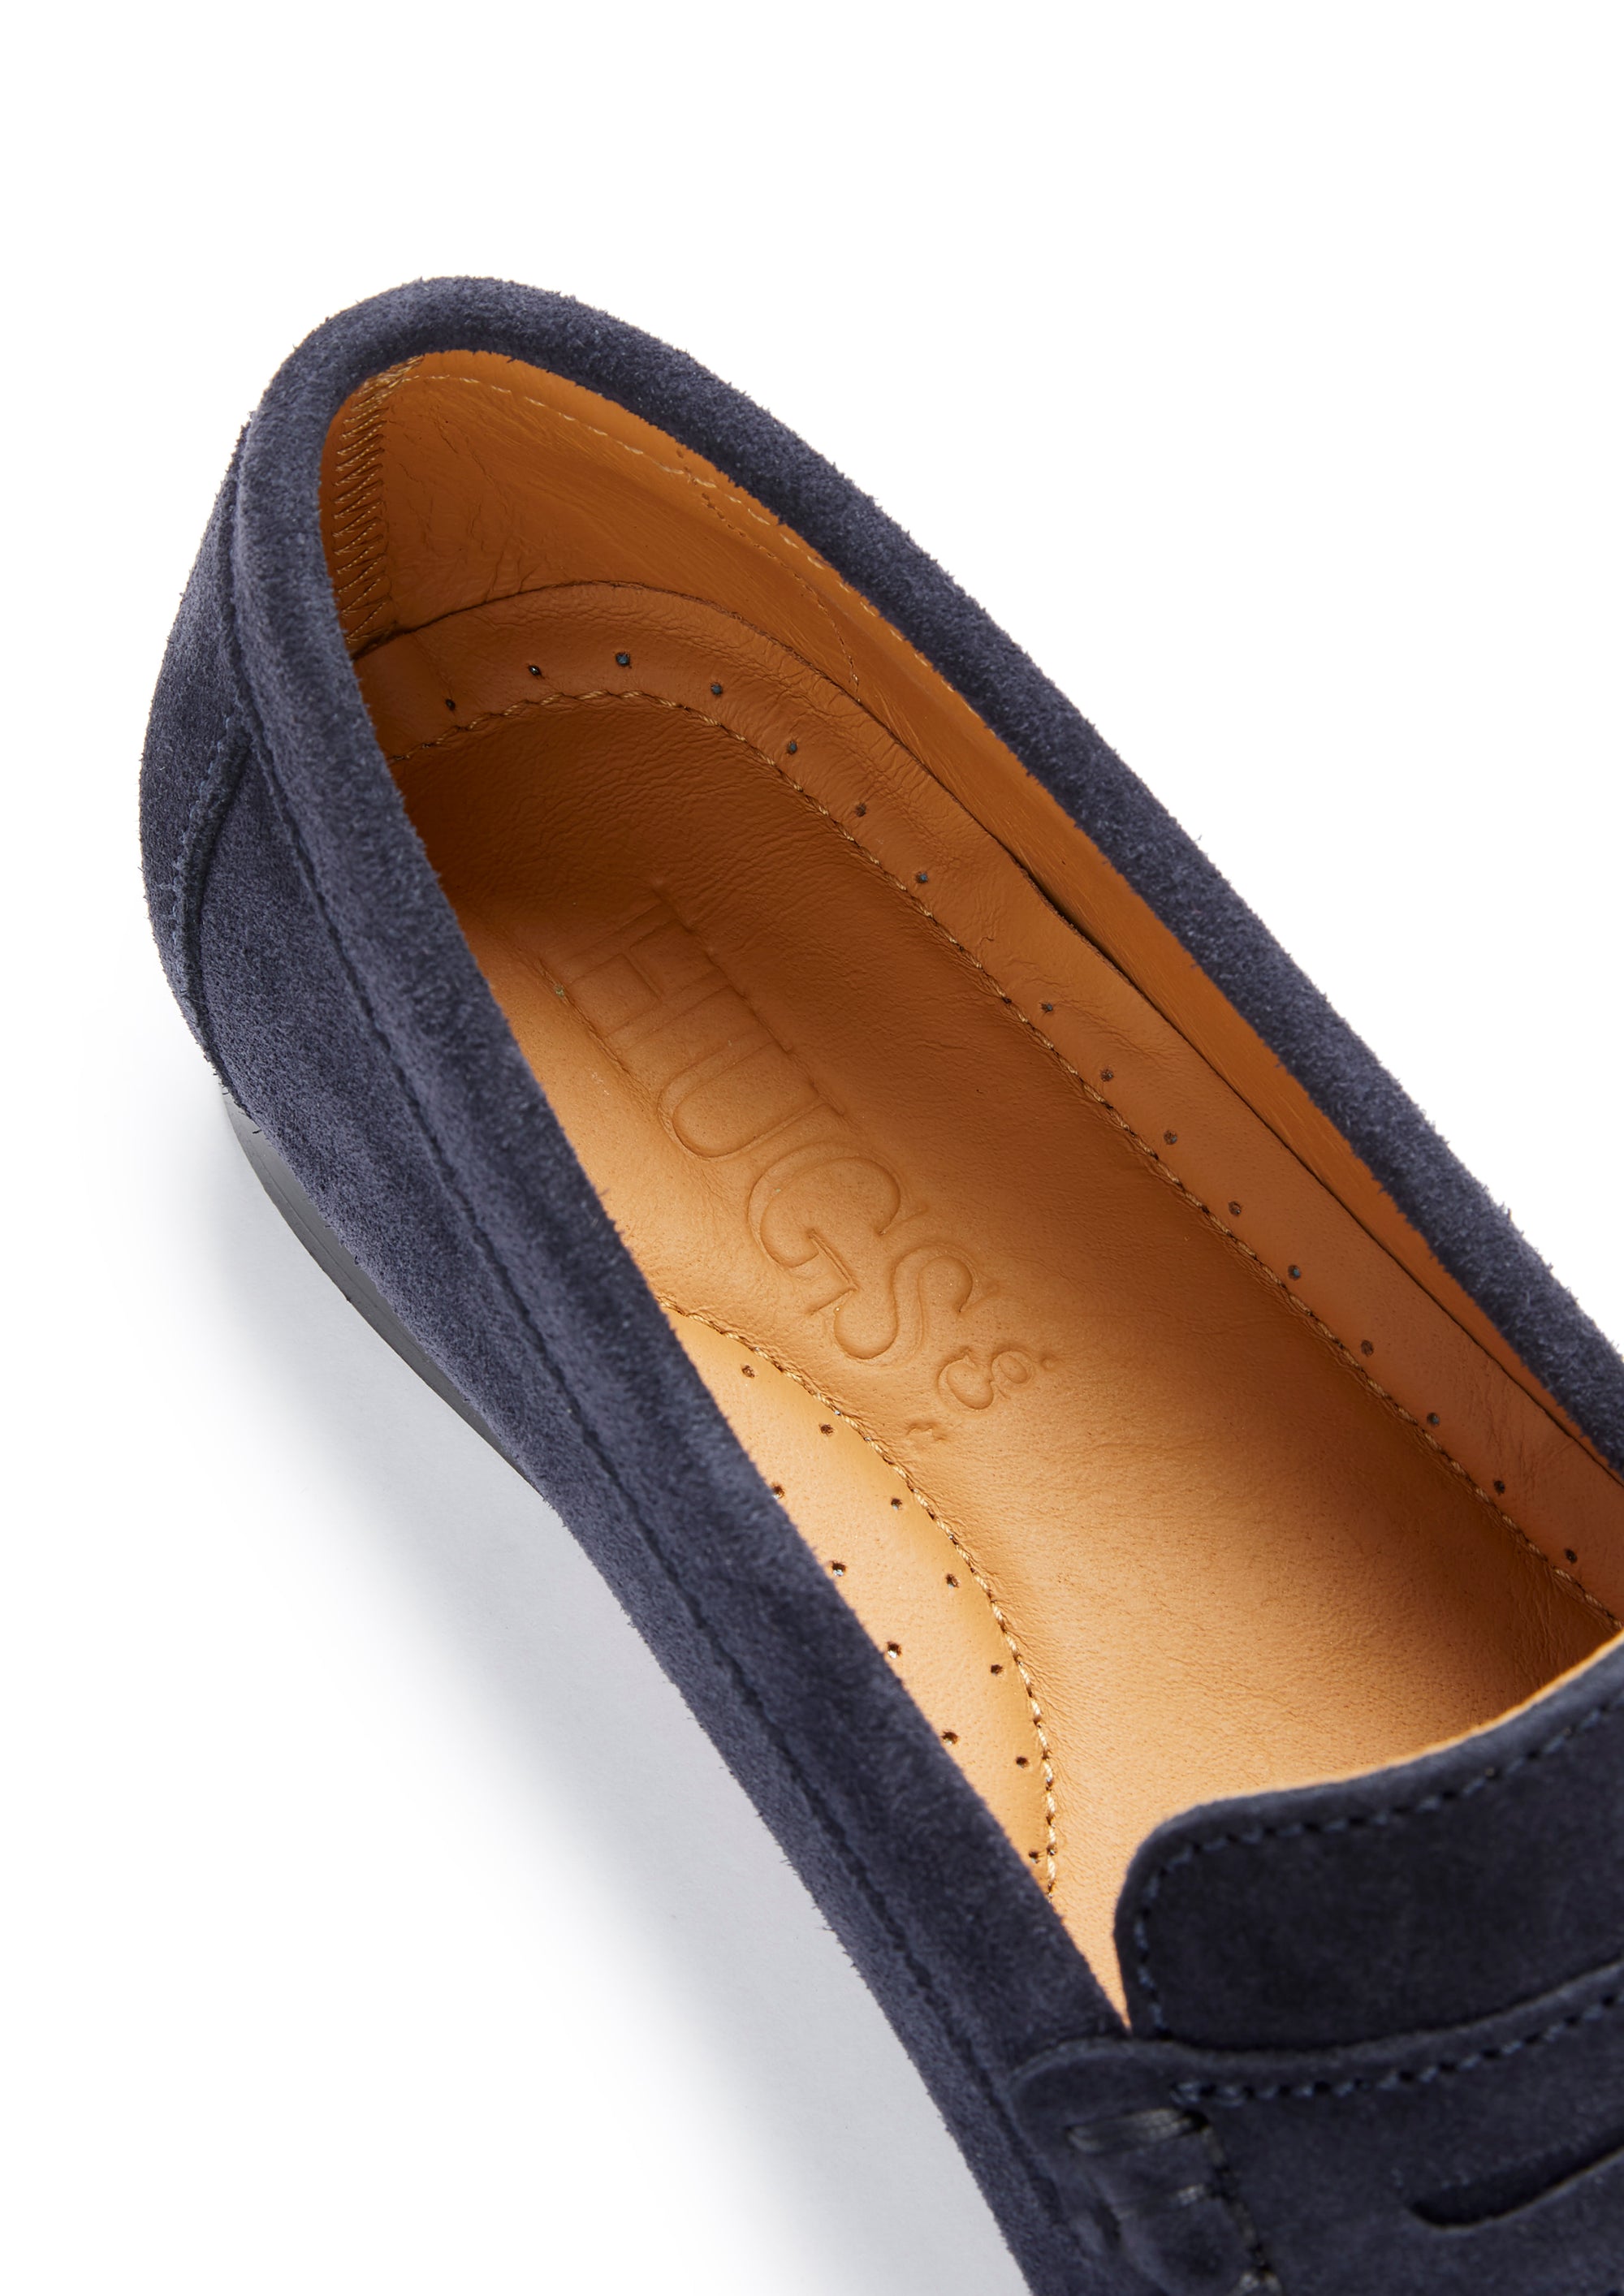 Women's Penny Loafers Leather Sole, navy blue suede